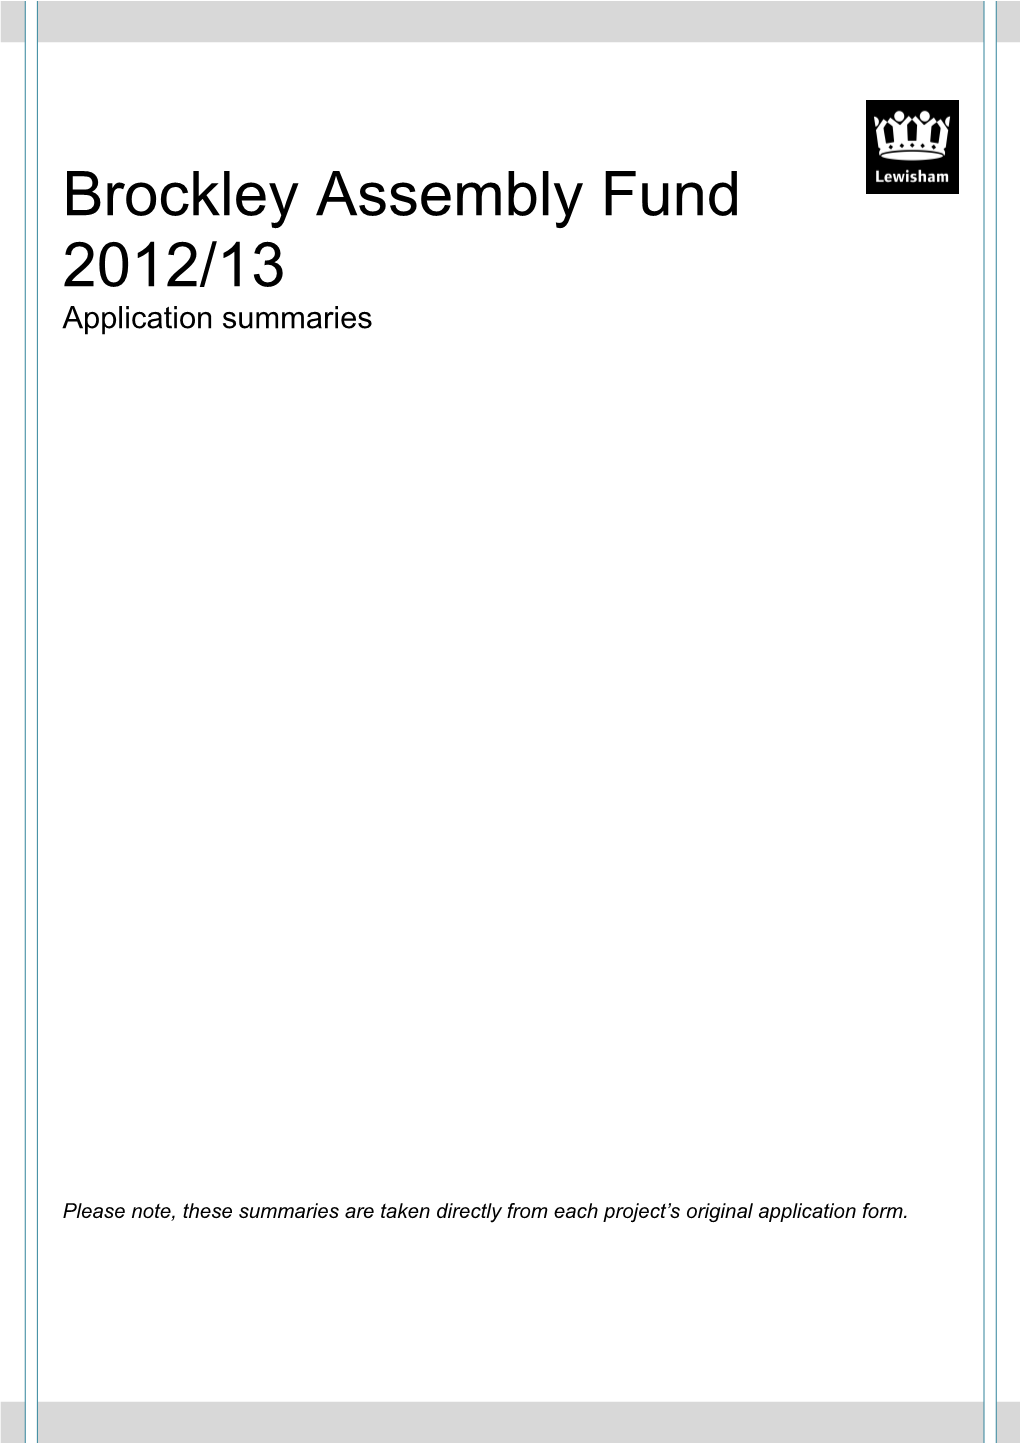 Brockley Assembly Fund 2012-13 Application Summaries